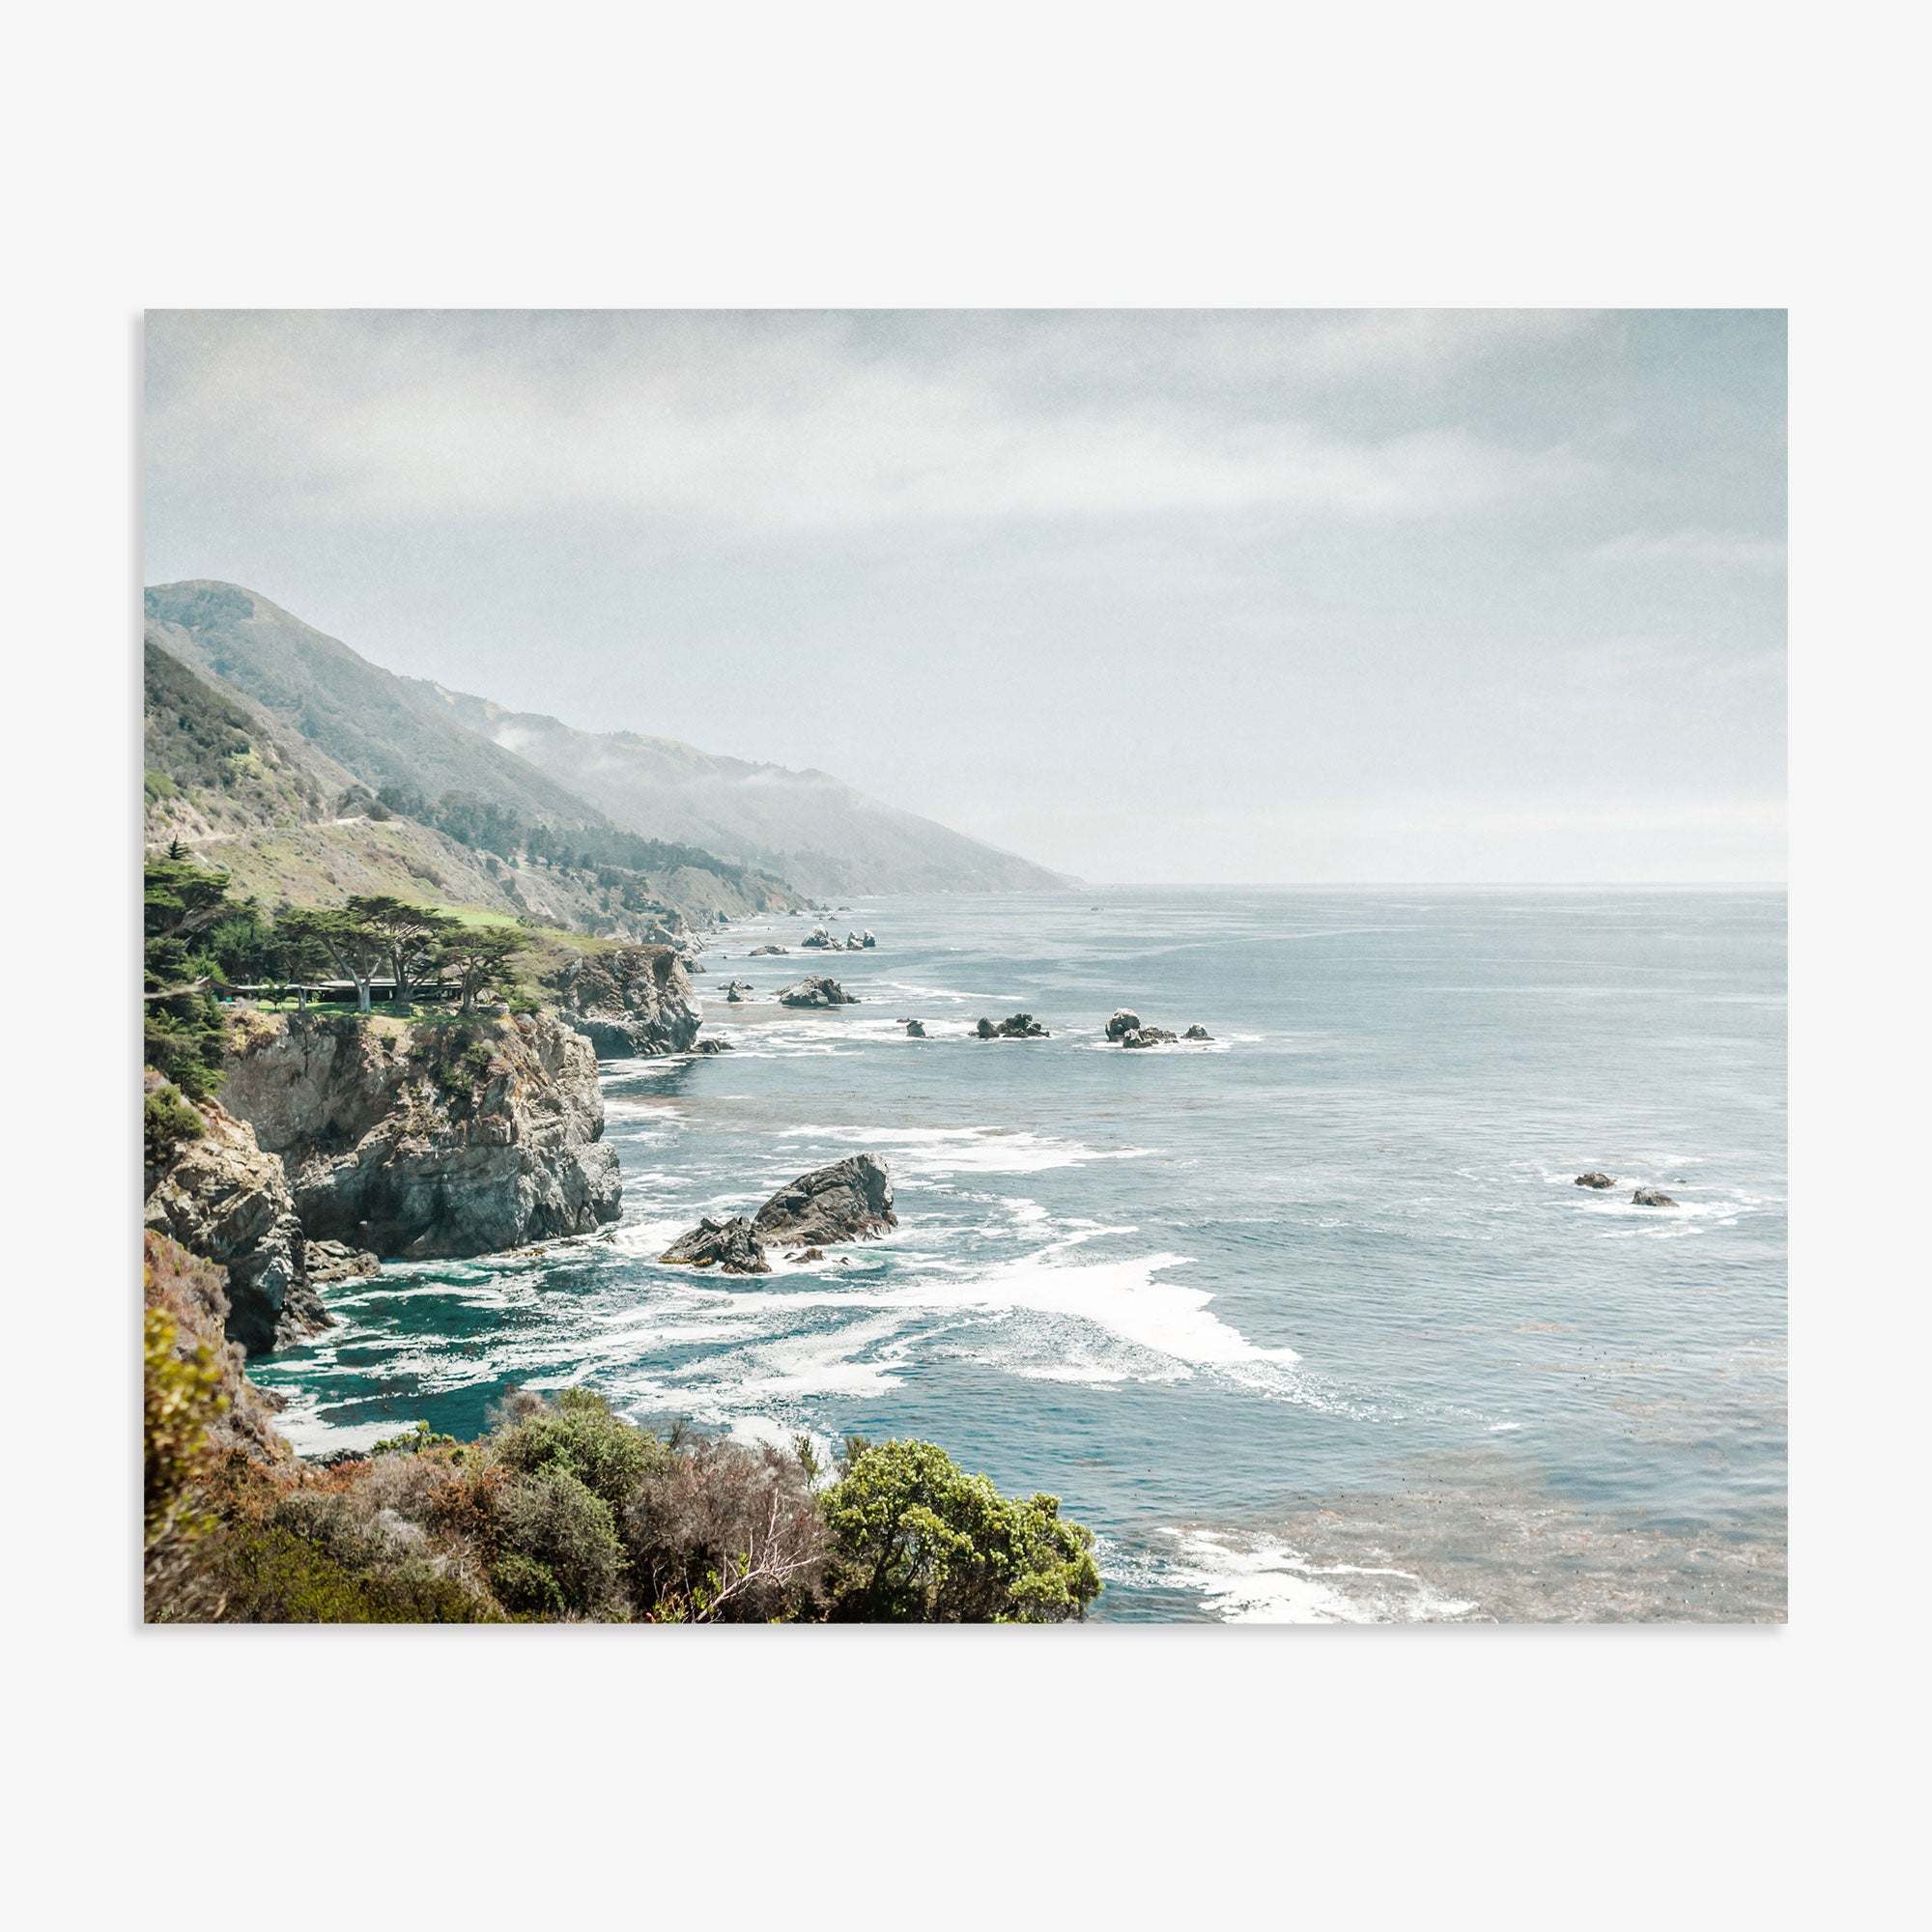 A scenic view of a misty coastline along California Highway 1 with rugged cliffs and waves crashing against the shore, under a soft cloudy sky. The landscape includes lush greenery and distant rocky outc featuring the Offley Green Big Sur Landscape Print, &#39;Rocky Rocks&#39;.